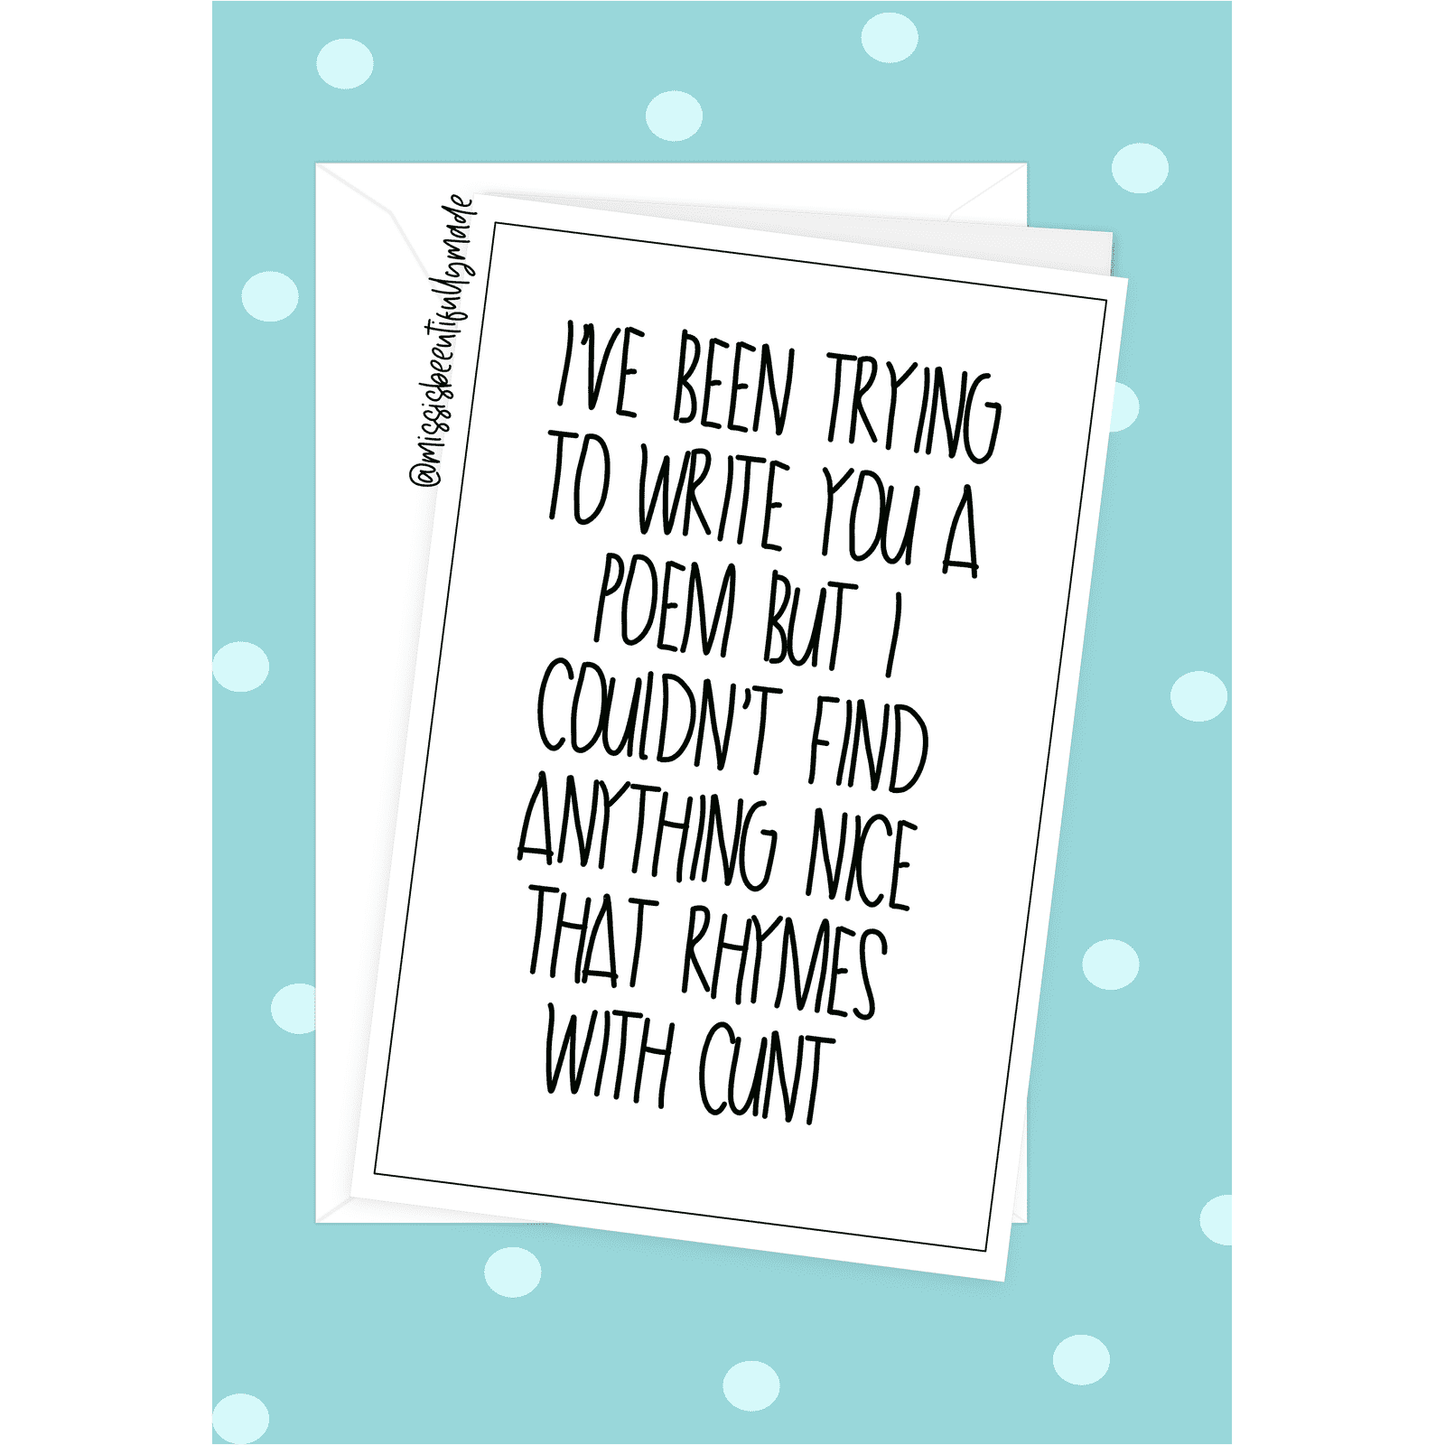 A5 card featuring a funny quote 'i tried to write you a poem but couldn't find anything nice that rhymes with cunt'. Glossy, blank inside 